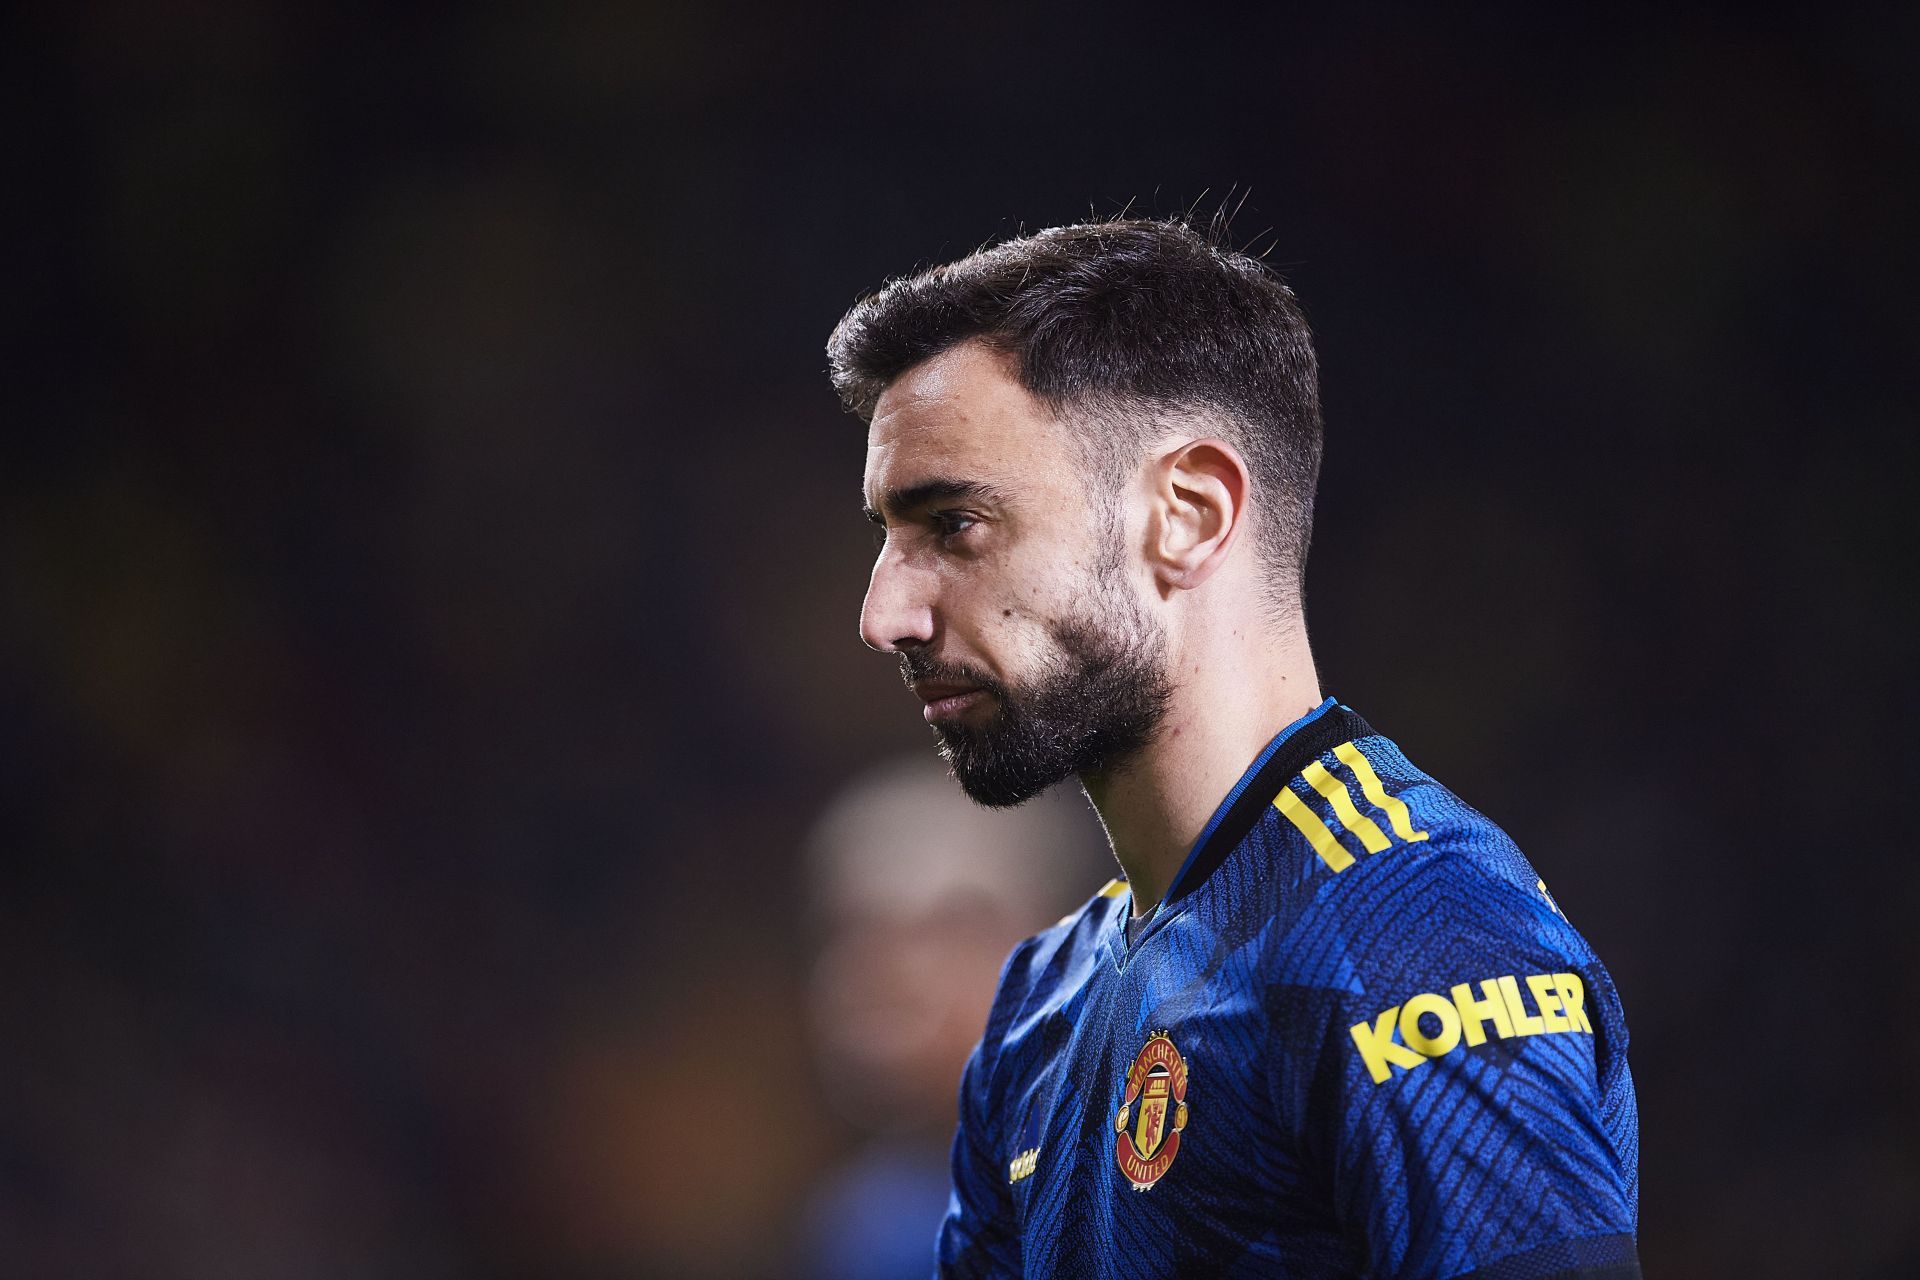 Bruno Fernandes joined Manchester United from Sporting Lisbon in the 2019 winter transfer window.